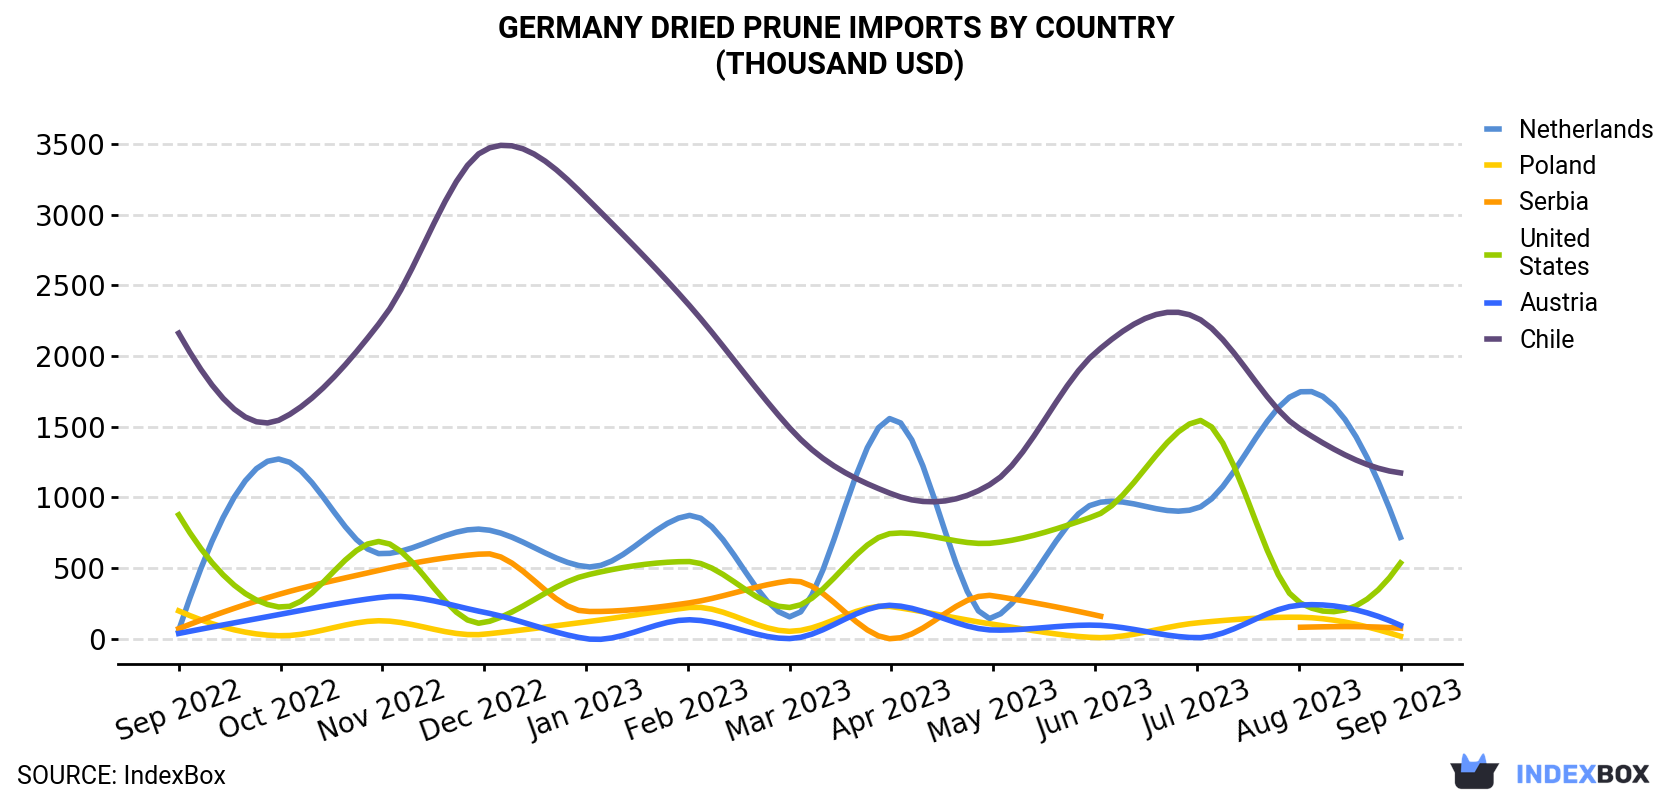 Germany Dried Prune Imports By Country (Thousand USD)